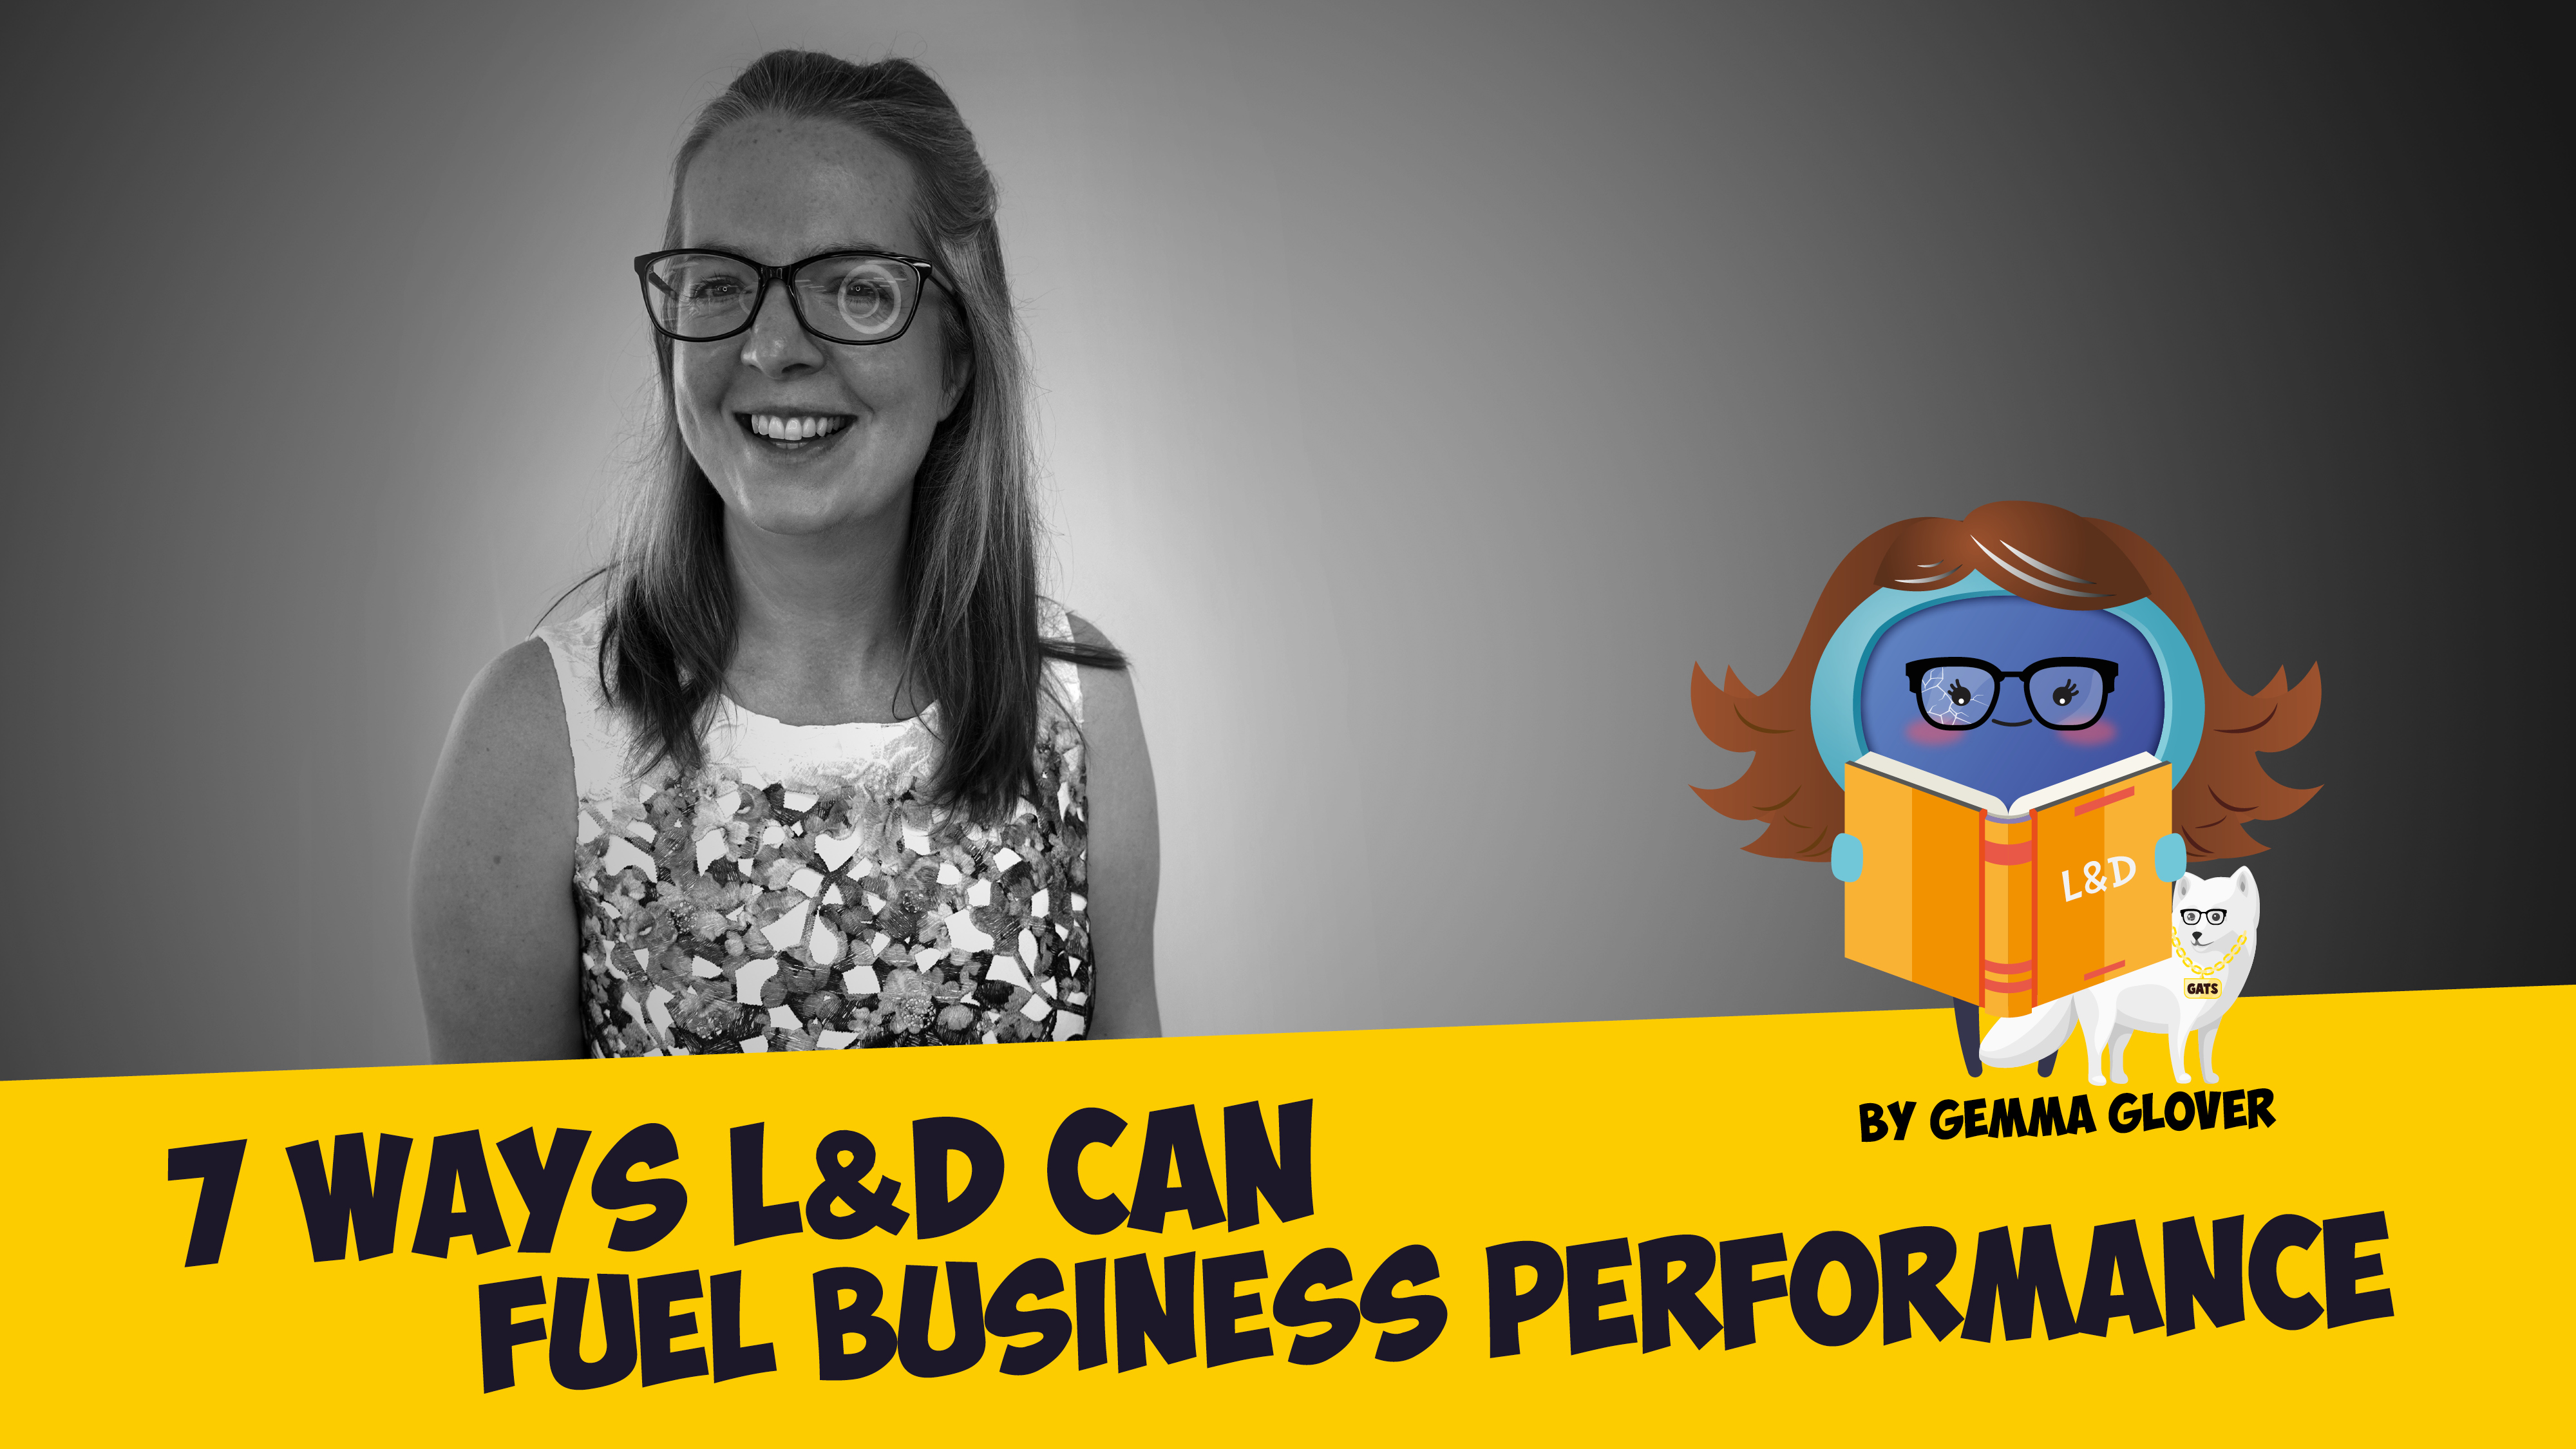 Learning Blogs 7 Ways L&D Can Fuel Business Performance (Gemma)